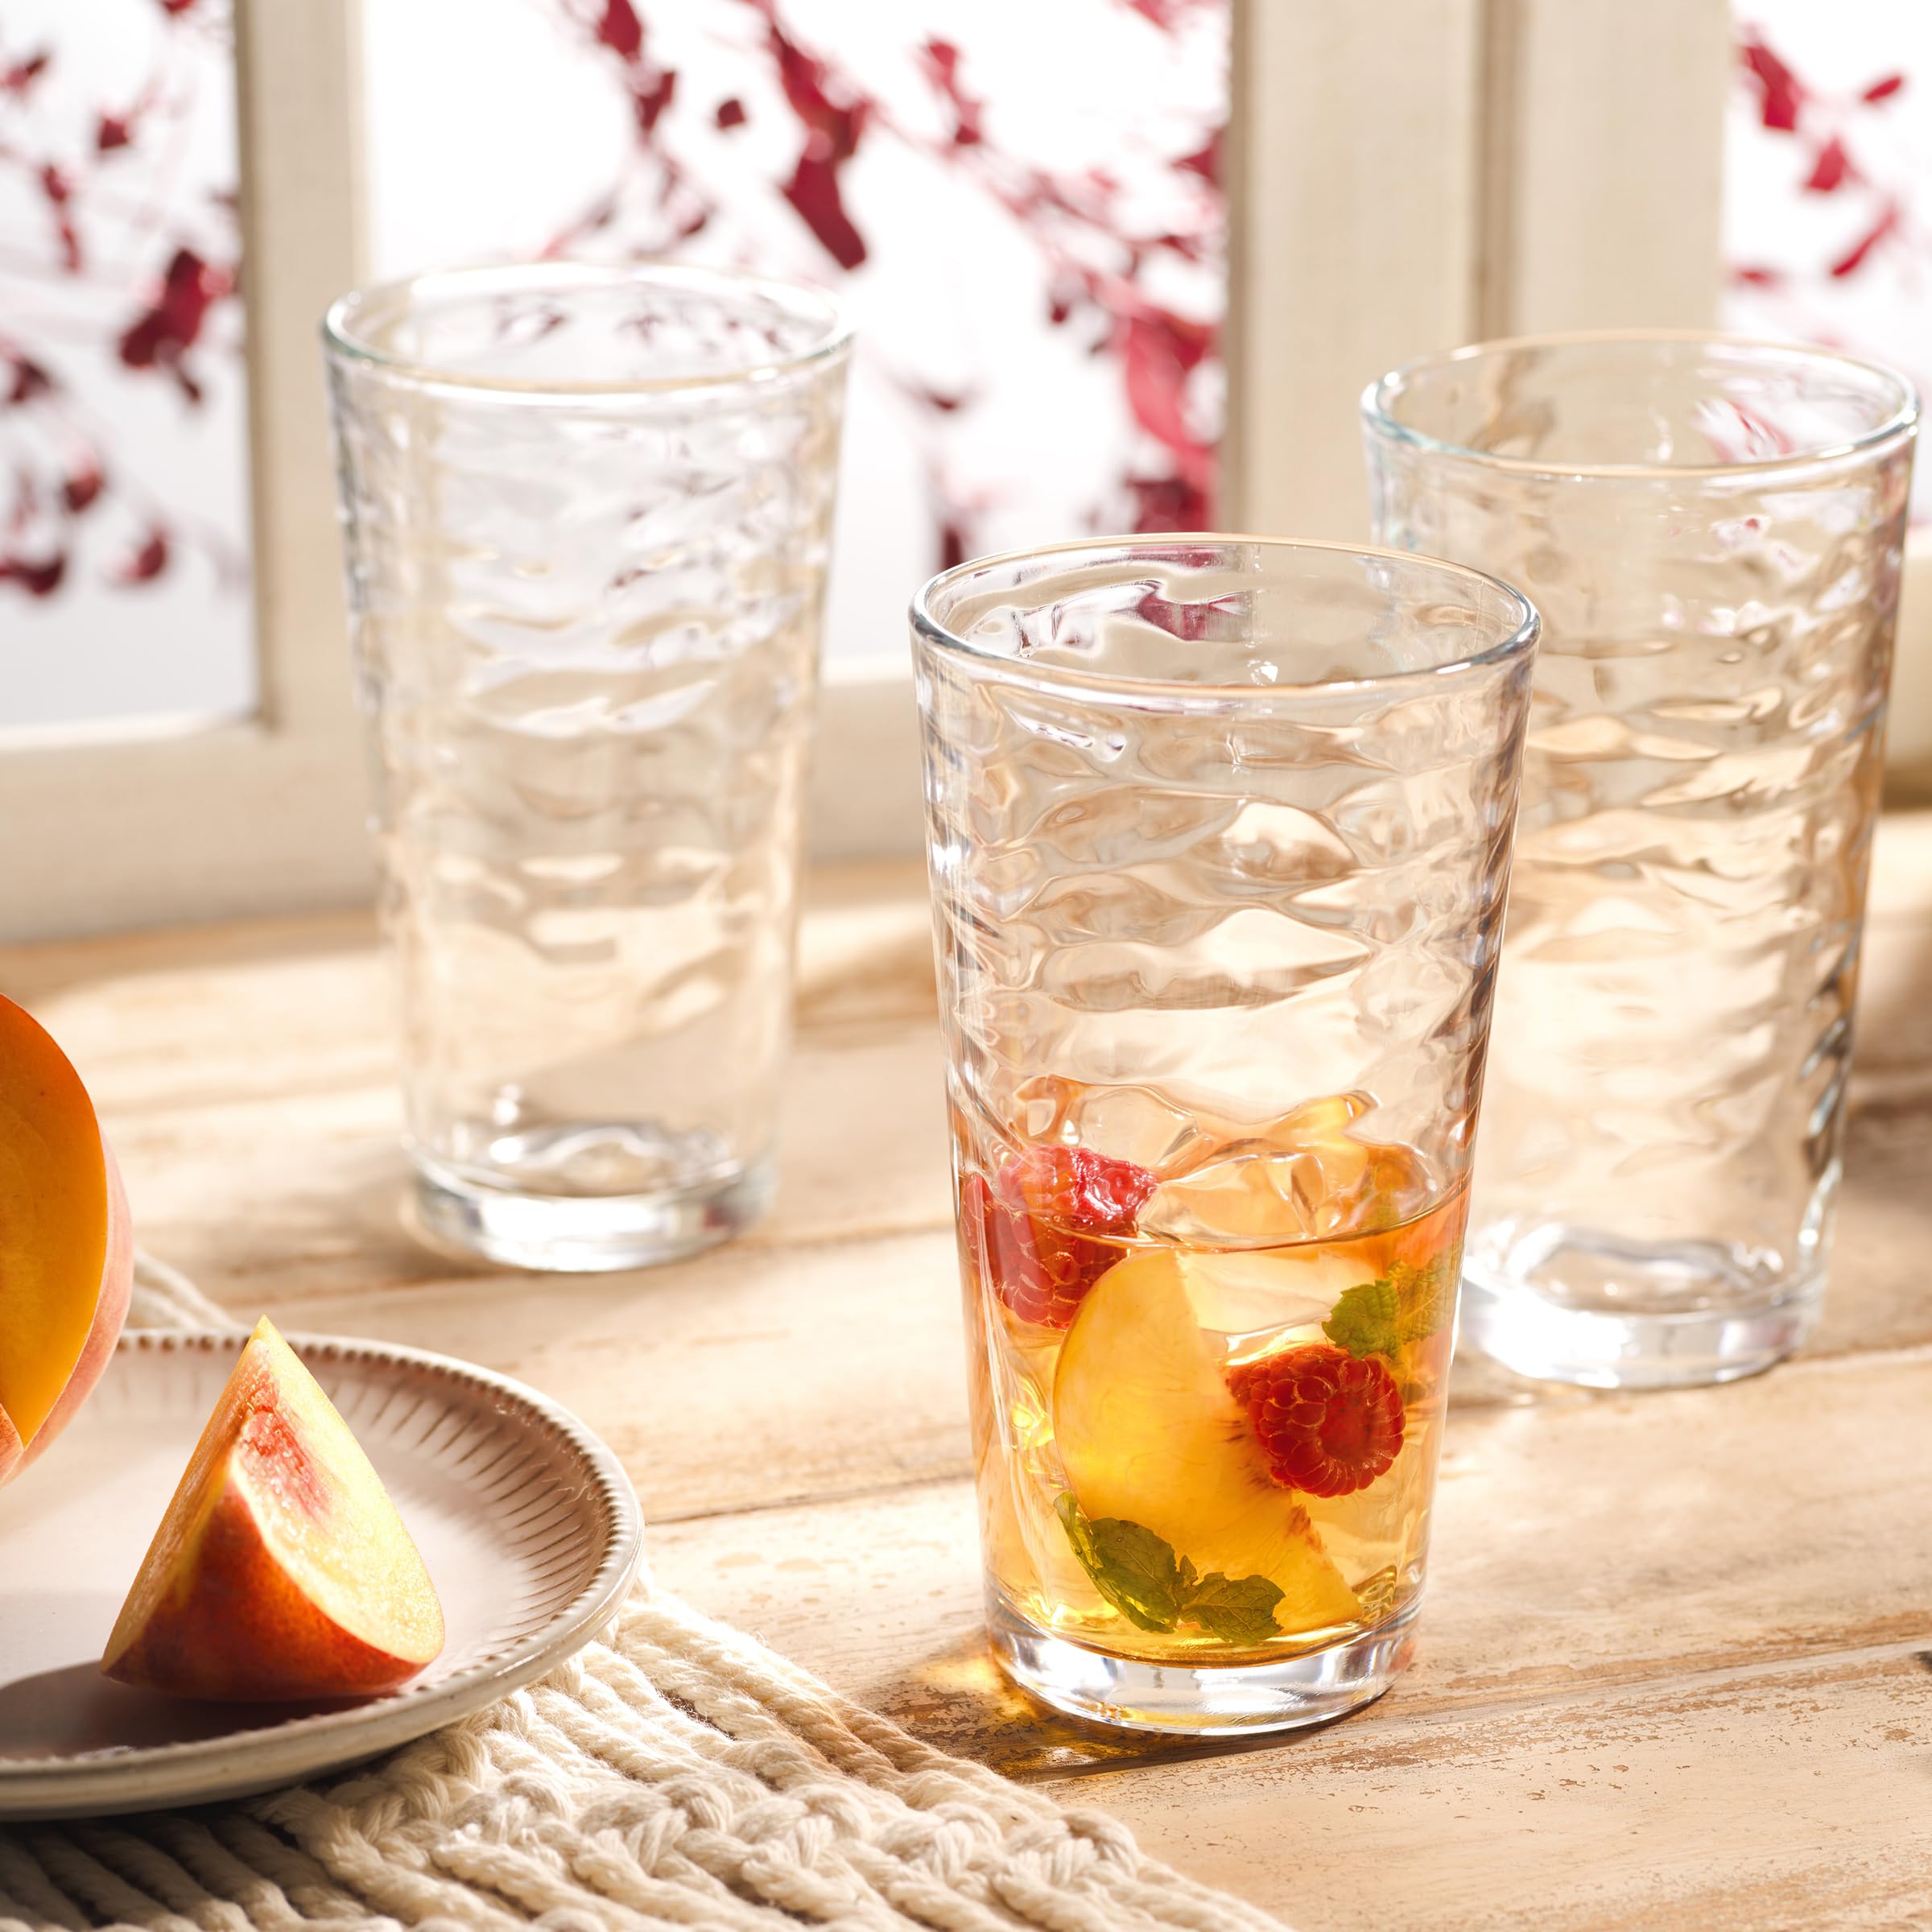 Glaver's Drinking Glasses Set of 4 Highball Glass Cups, 17 Oz. Basic Cooler Glassware, ideal for Water, Juice, Cocktails, Iced Tea and more. Dishwasher Safe.  - Acceptable